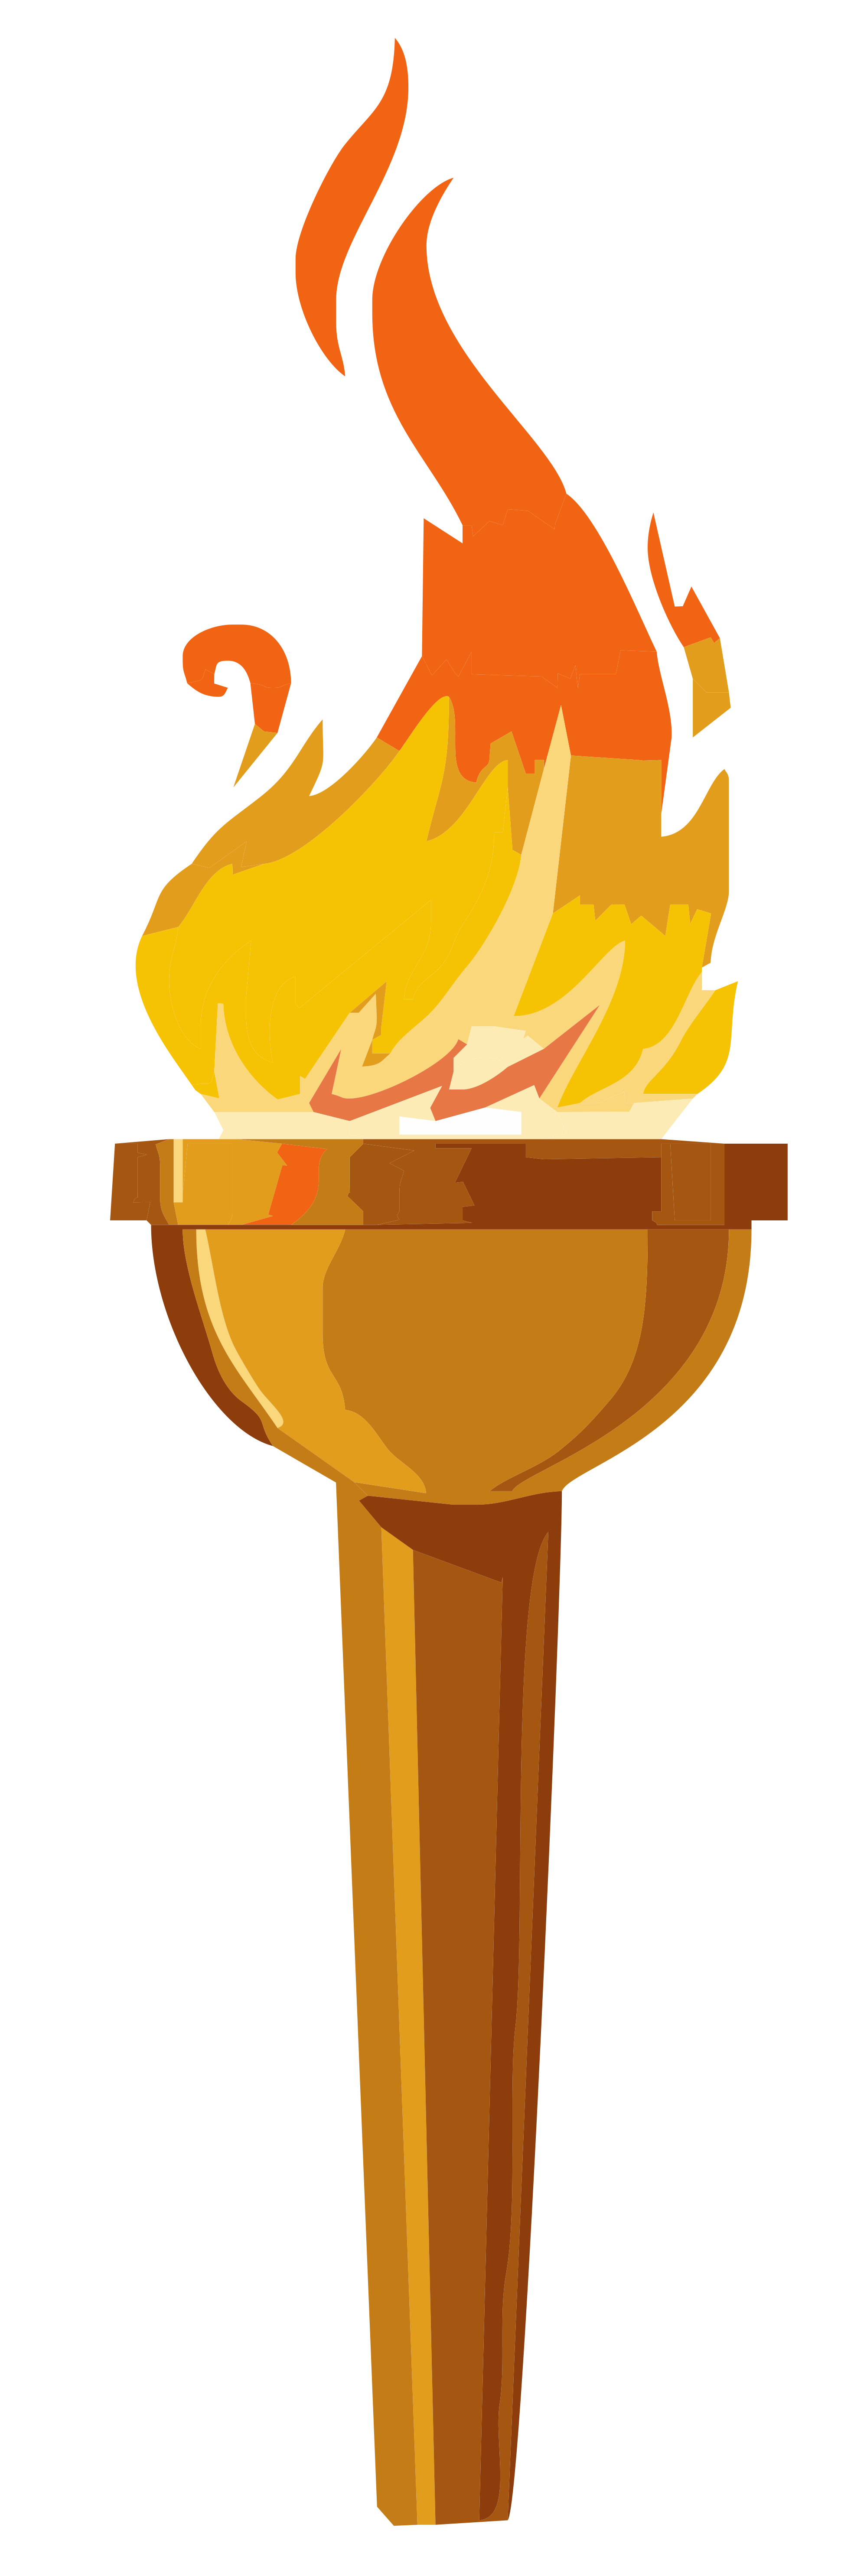 Torch PNG High Quality Image